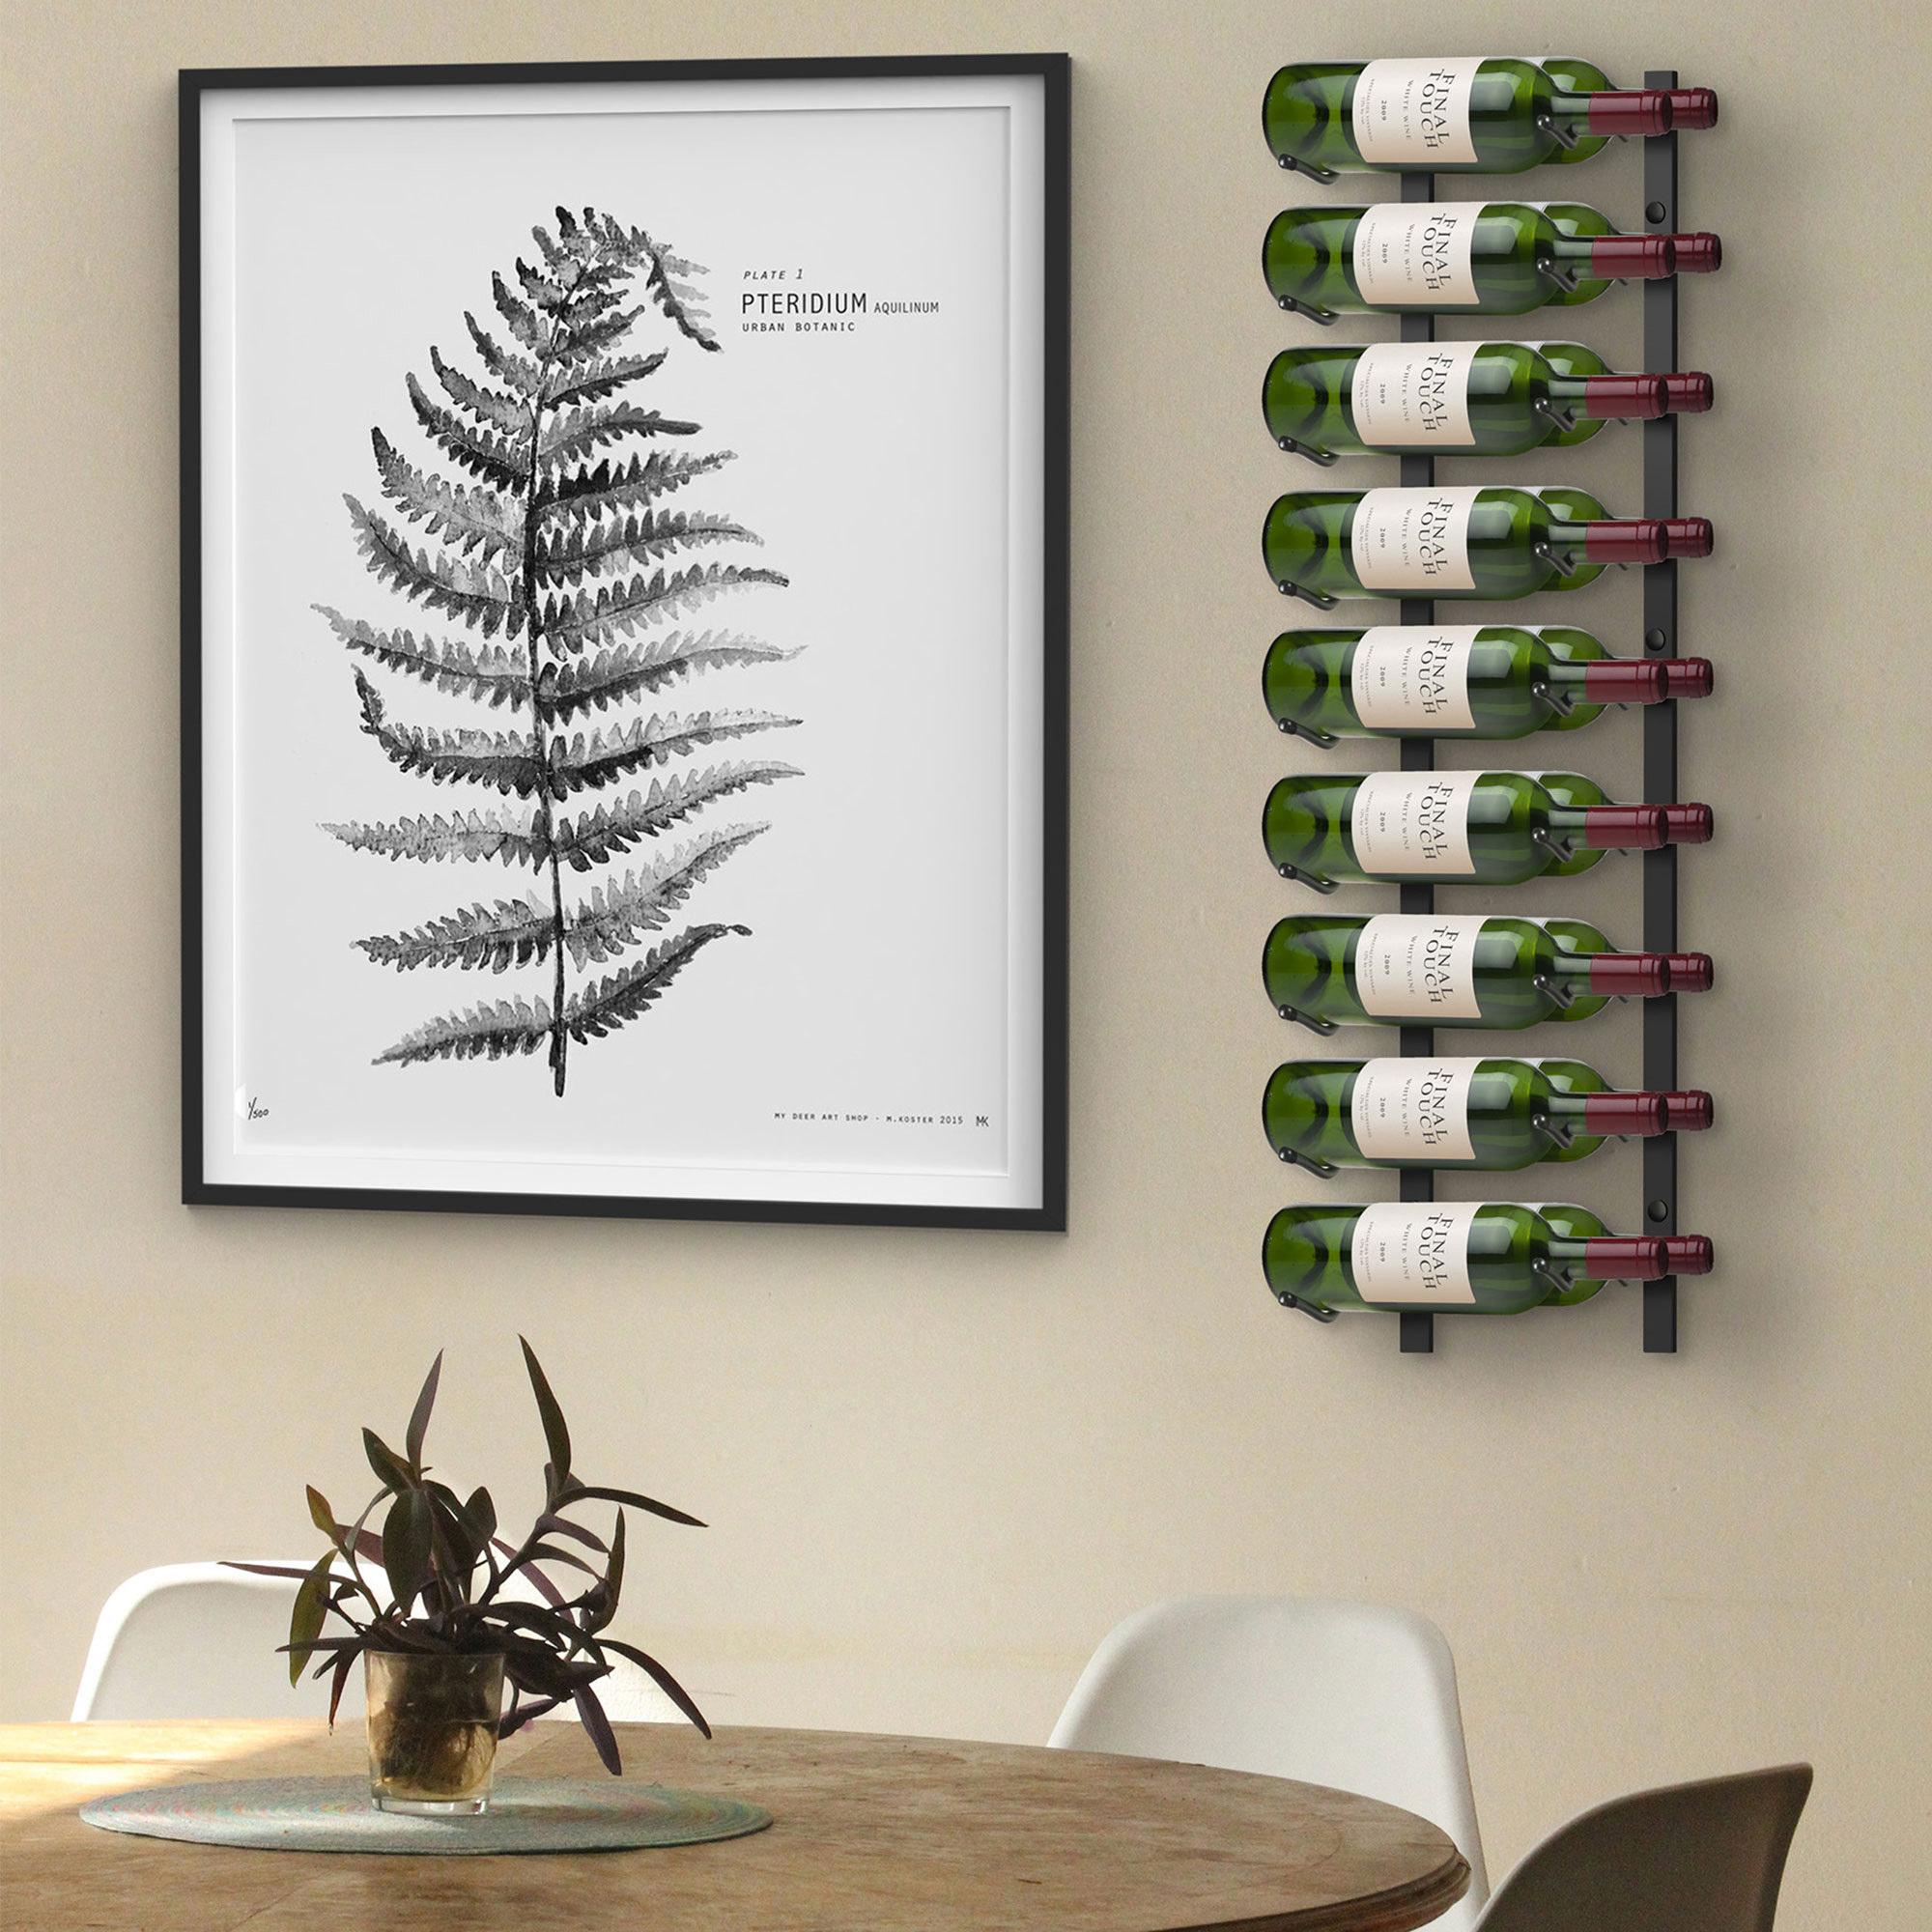 Final Touch Wrought Iron Wall Mounted Wine Rack 18 Bottle Black Image 4